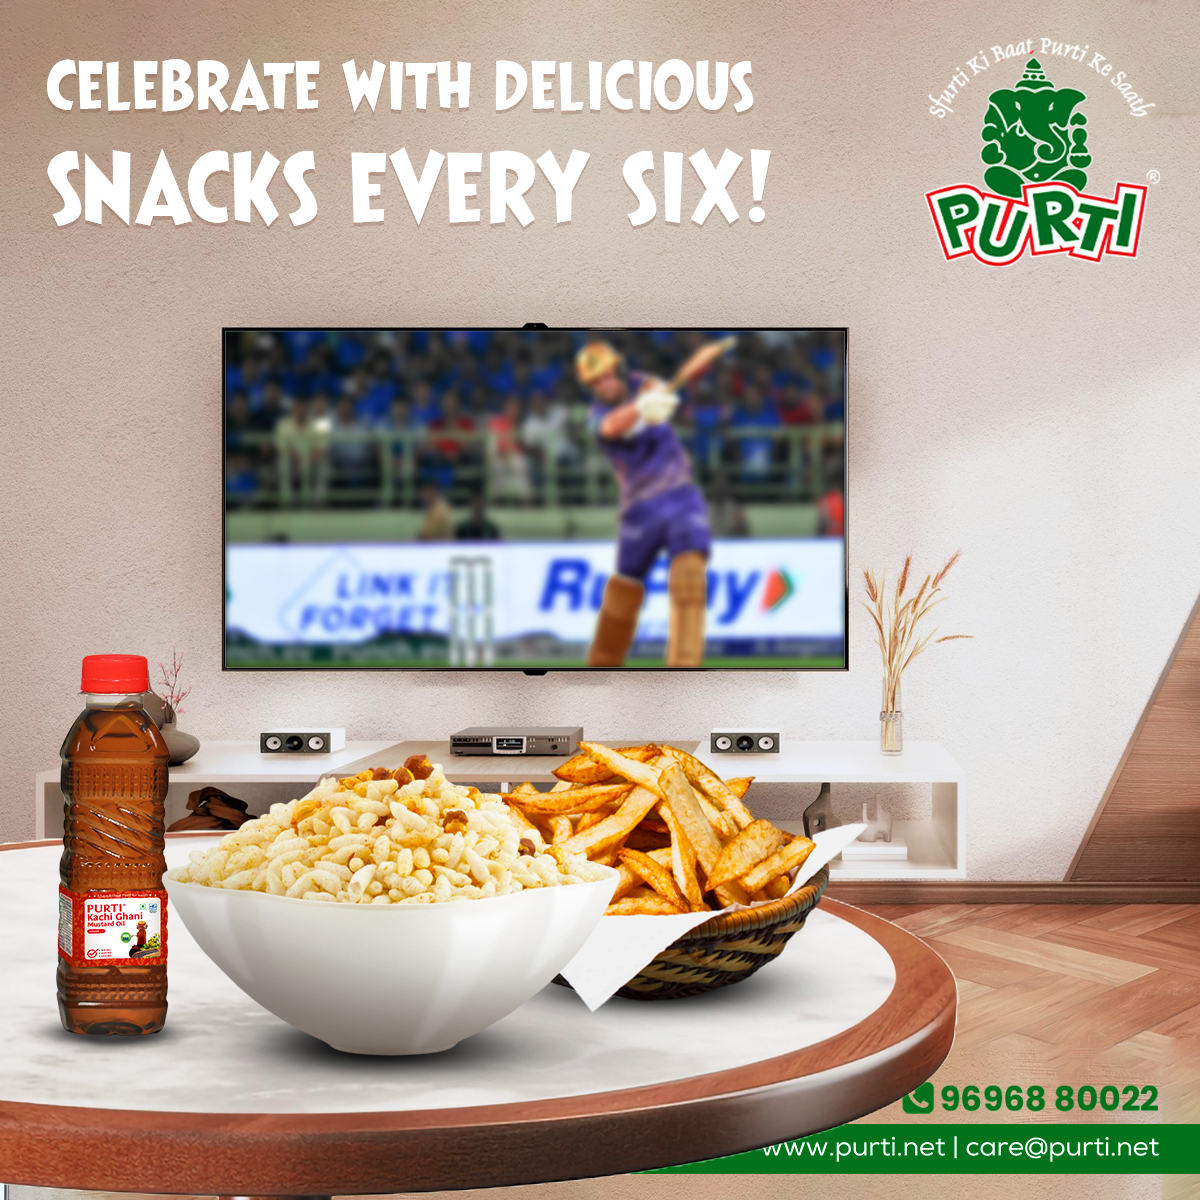 Enhance your celebrations of every six with delectable snacks, complemented by the distinctive flavor of 𝐏𝐮𝐫𝐭𝐢 𝐊𝐚𝐜𝐡𝐢 𝐆𝐡𝐚𝐧𝐢 𝐌𝐮𝐬𝐭𝐚𝐫𝐝 𝐎𝐢𝐥!! For Distributorship 📞on 96968 80022 #Purti #EdibleOil #CookingOil #KachiGhani #MustardOil #cricketlovers #T20